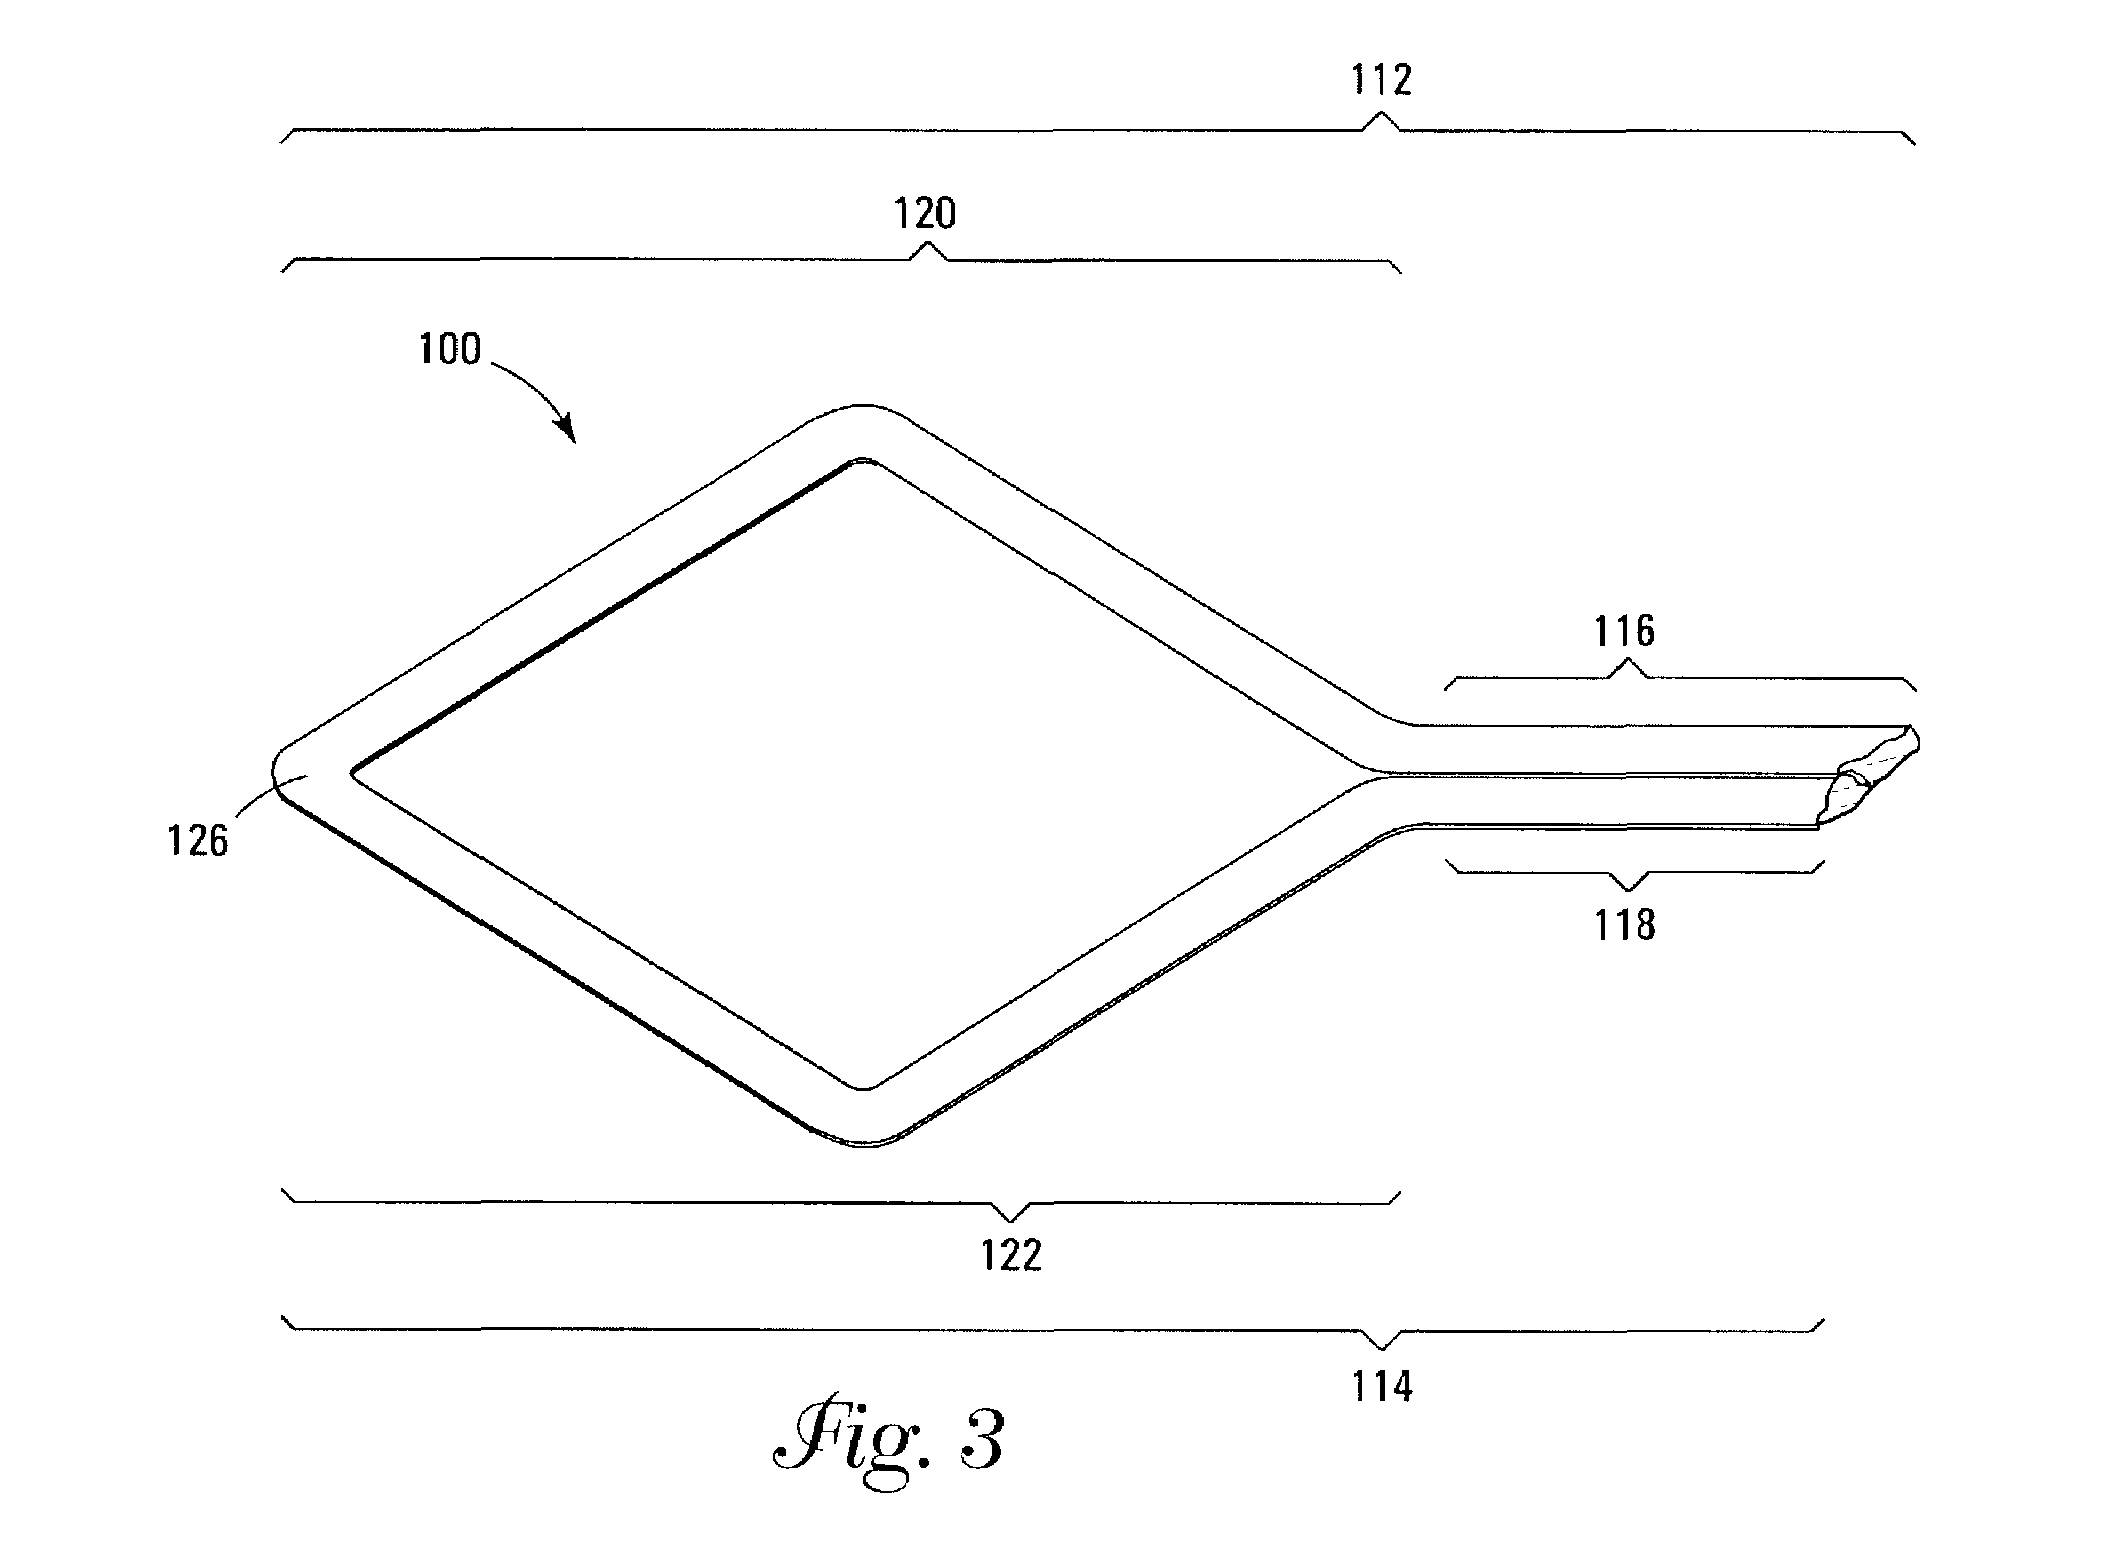 Non-invasive surgical ligation clip system and method of using